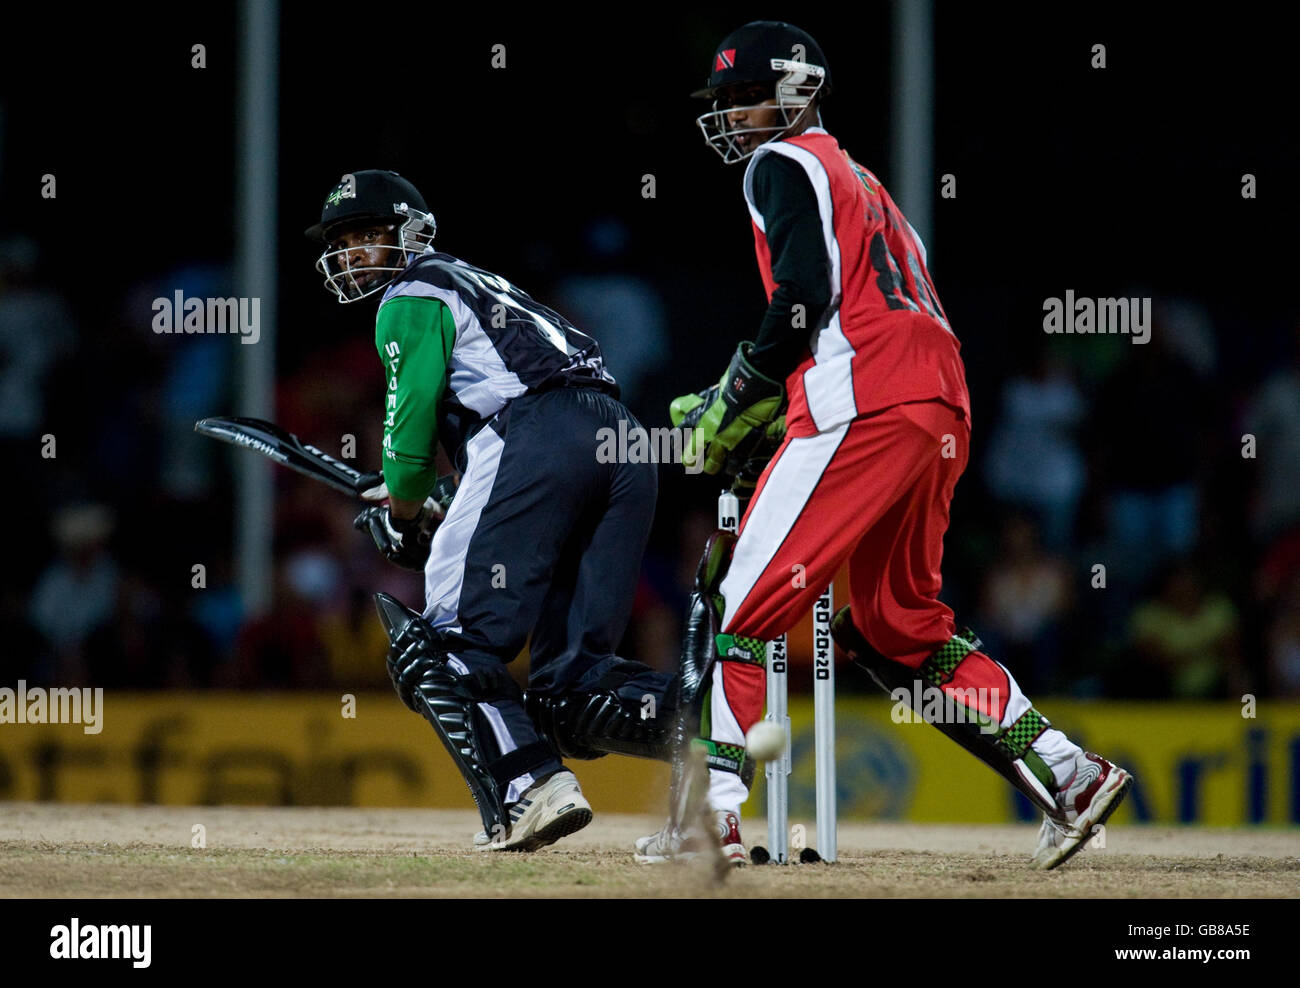 Stanford Superstars' Sylvester Joseph hits past Trinidad and Tobago wicketkeeper Denesh Ramdin during the Stanford Super Series match at Stanford Cricket Ground, Coolidge, Antigua. Stock Photo